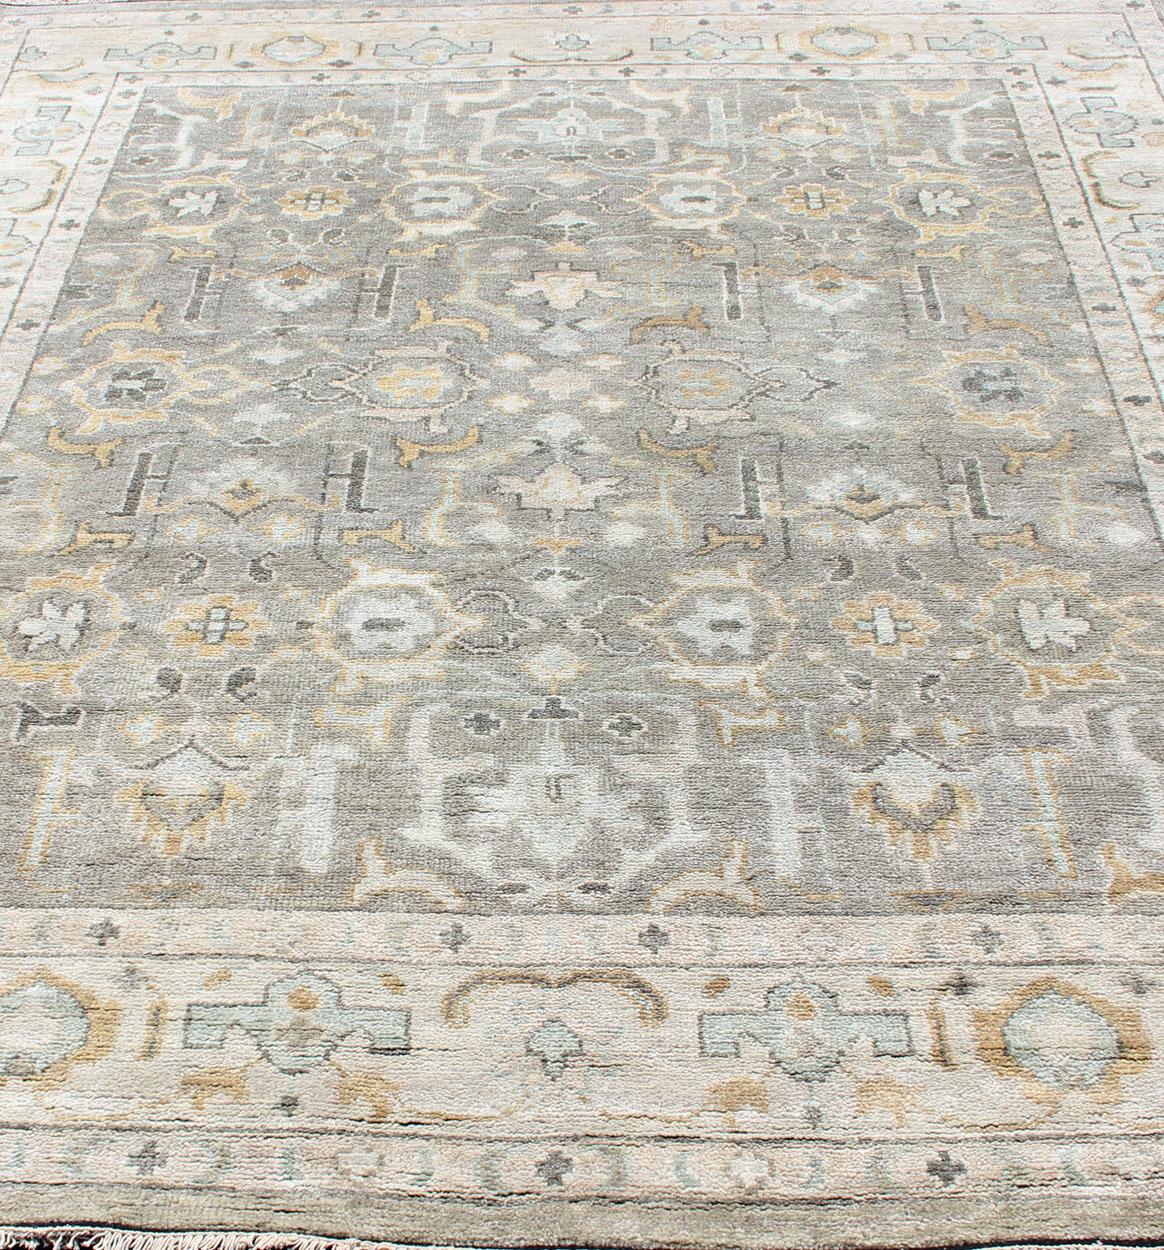 Hand-Knotted Indian Oushak in Faded Green, Taupe, Gold and Cream. 
Measures 8'0 x 10'2
This Indian Oushak was hand-knotted with wool during the 2010's. The cream border has gold and light blue repeating medallions. The faded taupe field displays a